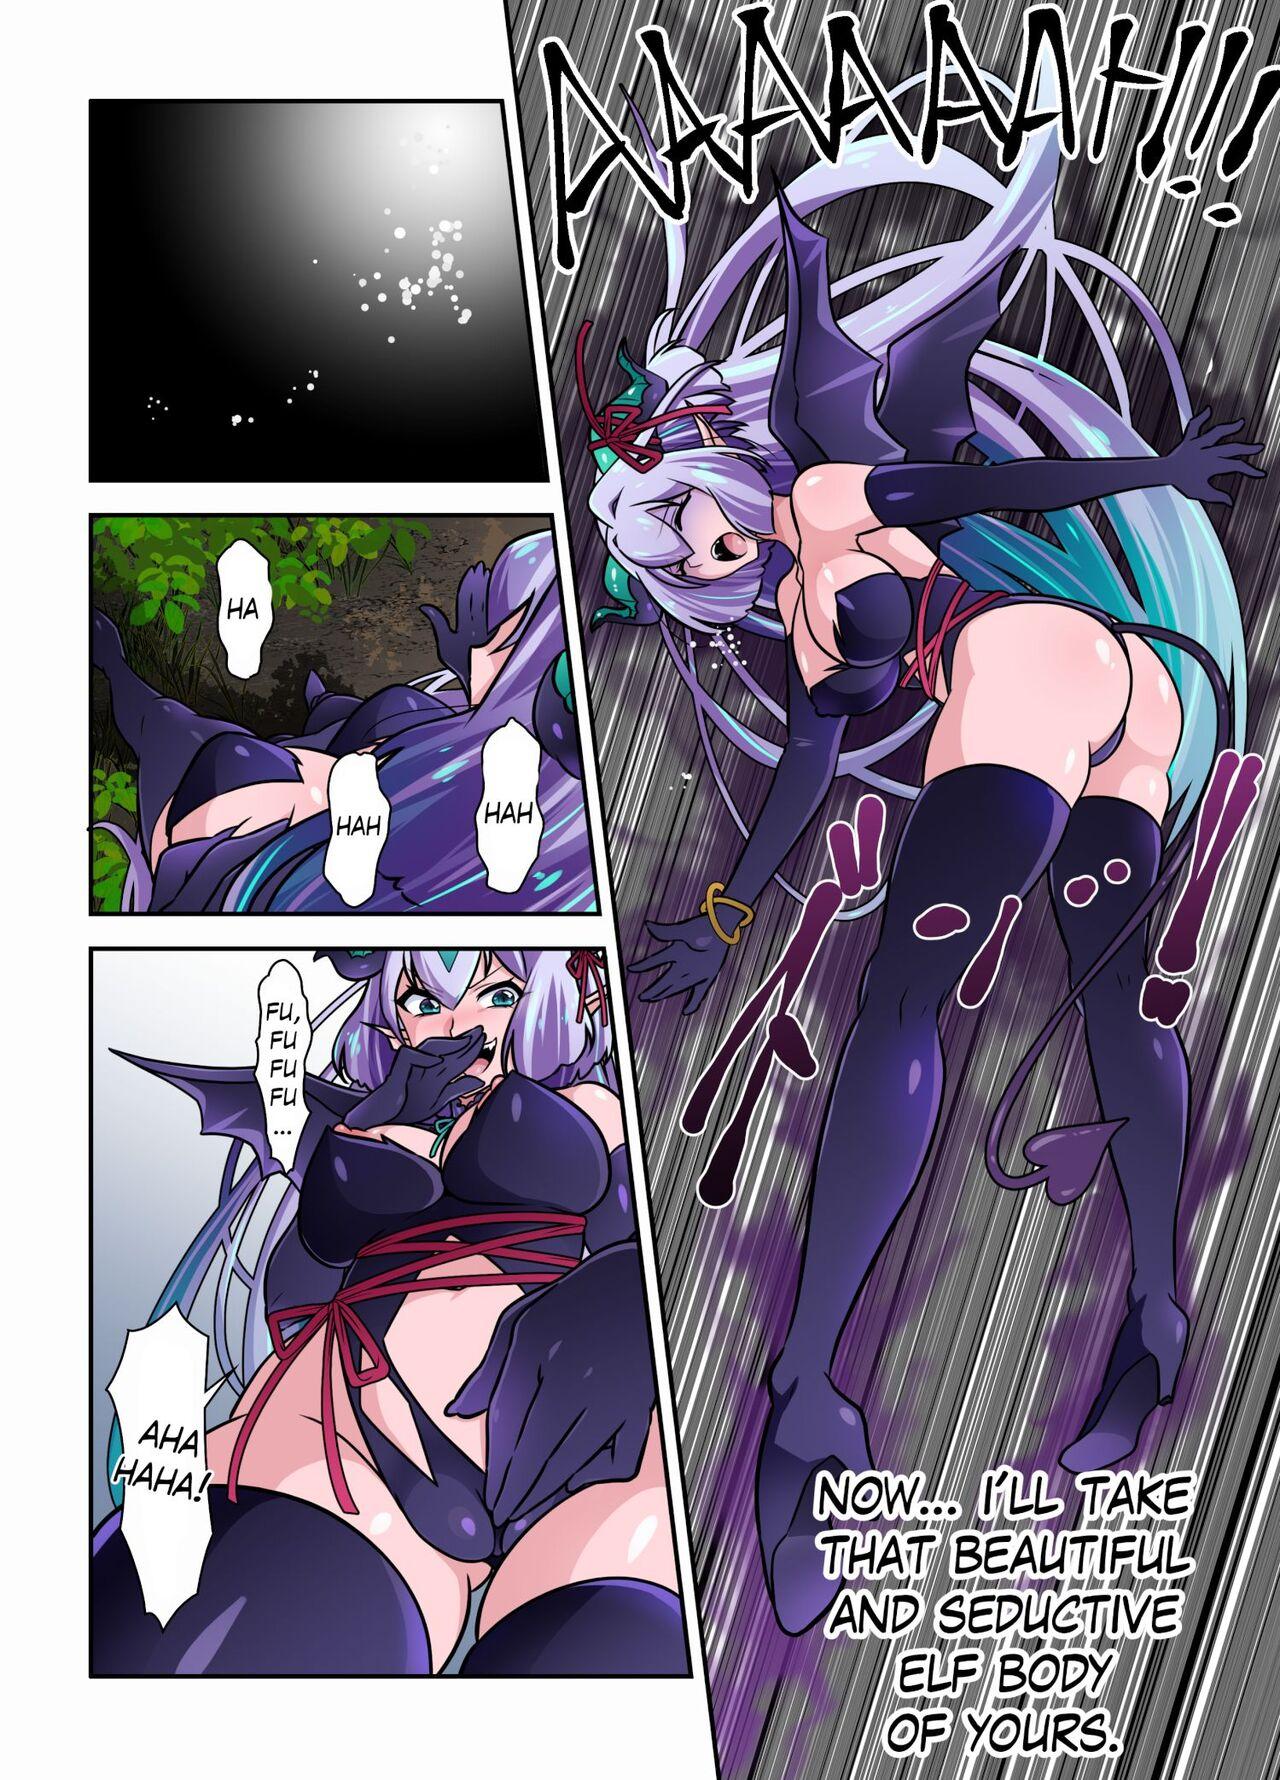 Mujer Elf Taken Over By Succubus Action - Page 5